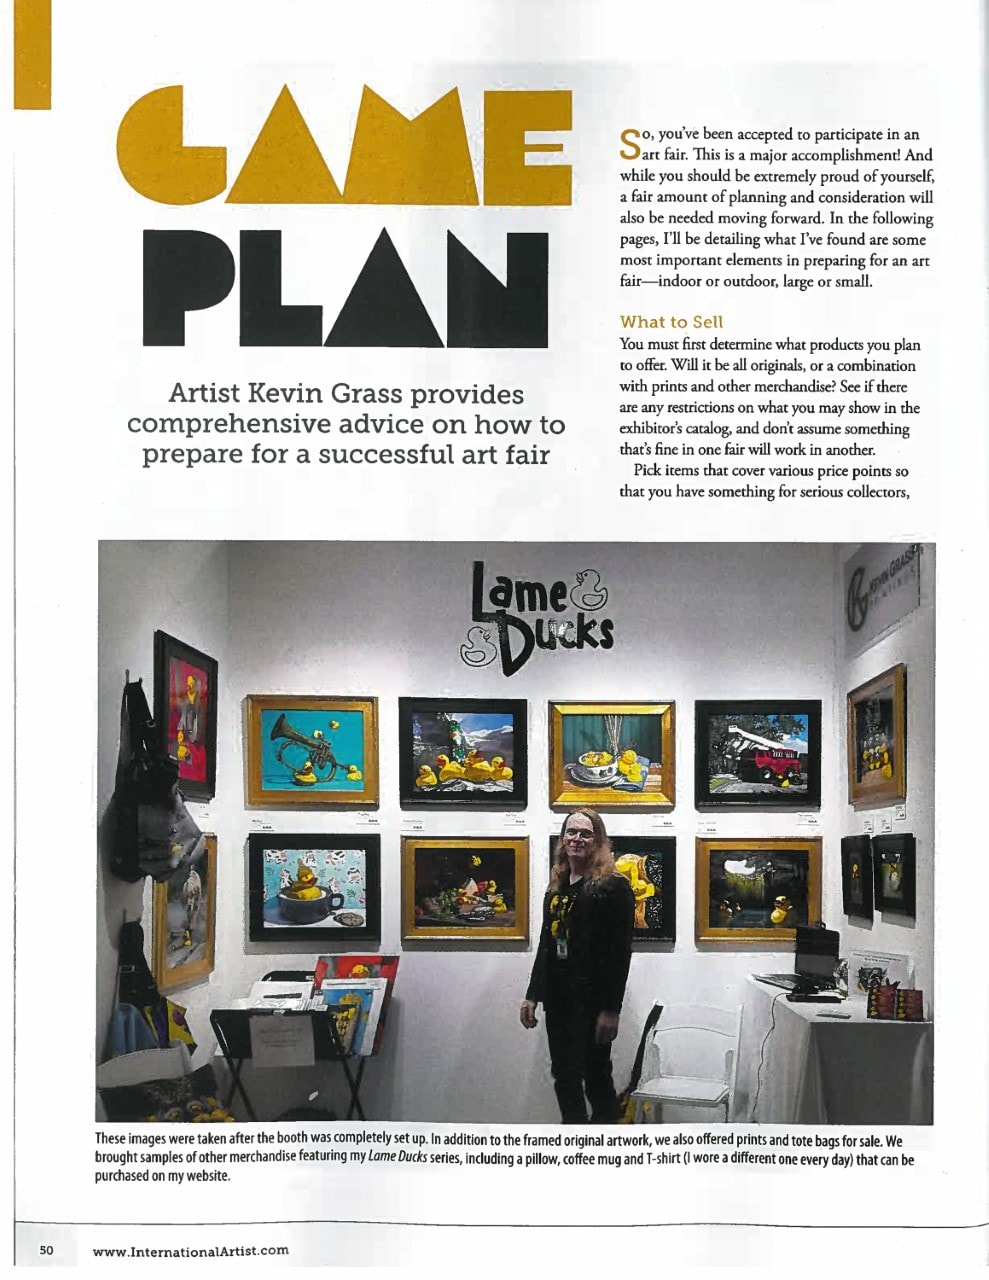 Page 1 of article on how to prepare for a successful art fair